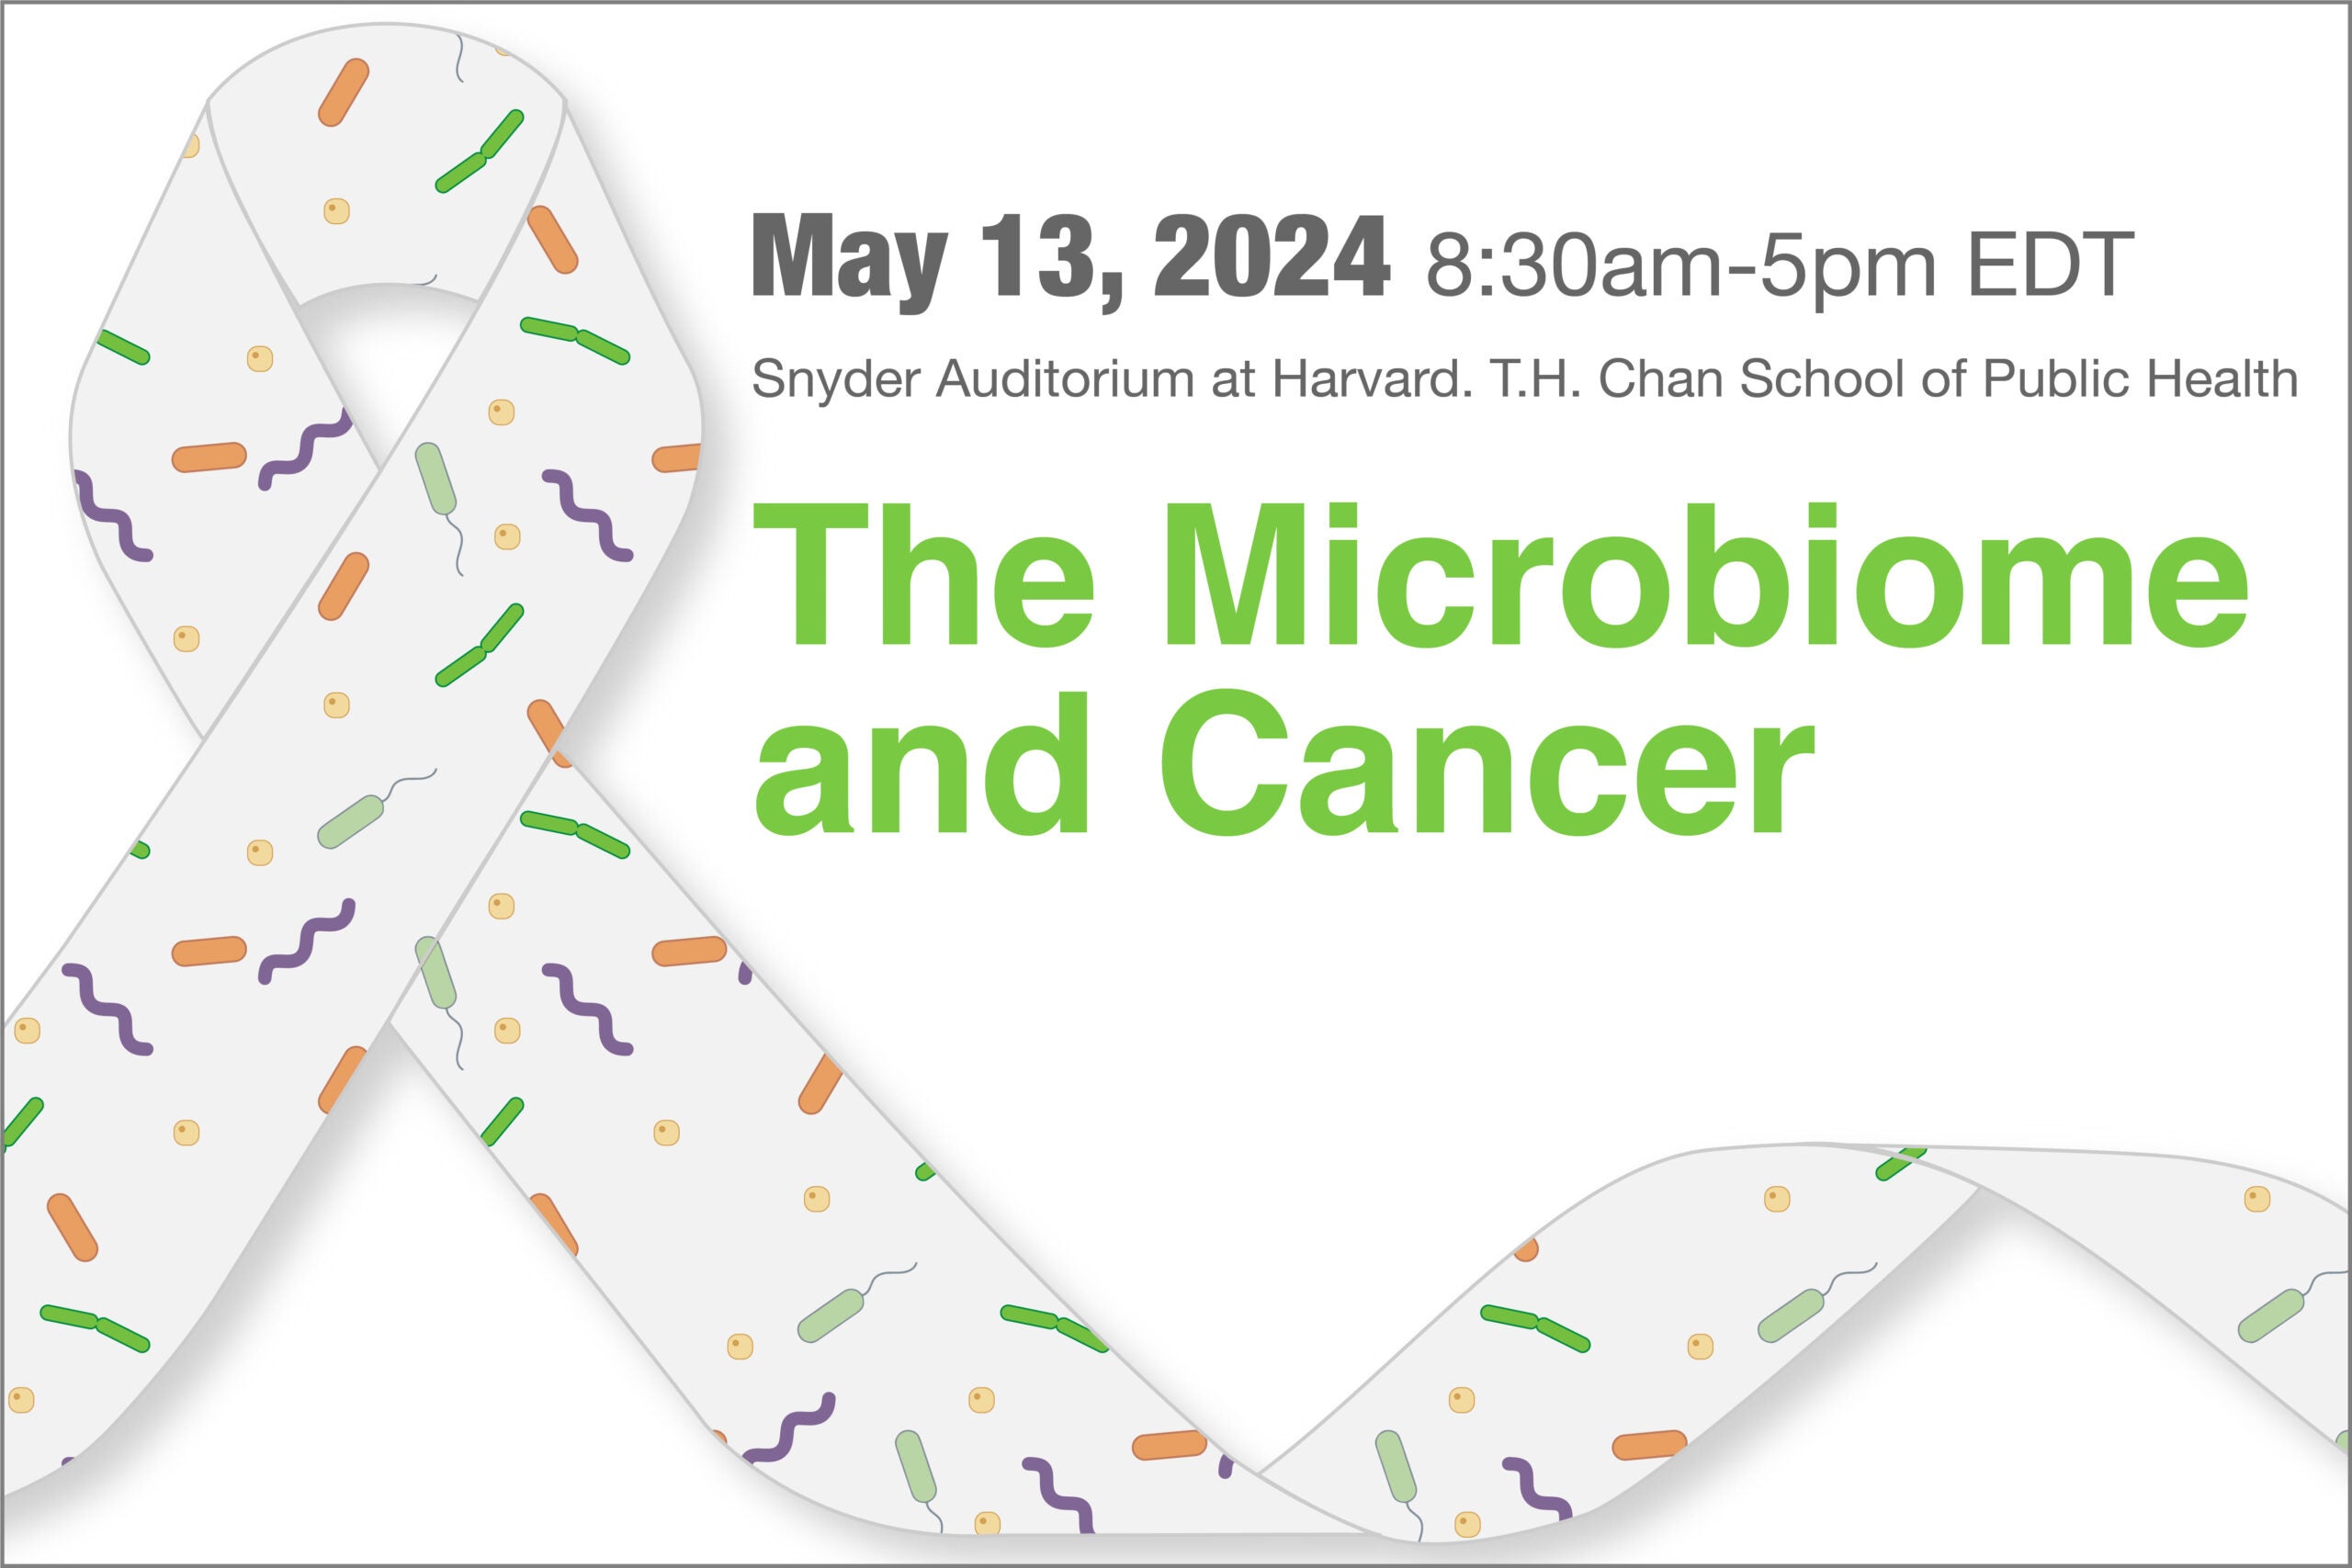 The Microbiome and Cancer, May 13, 2024, 8:30-5 pm, Snyder Auditorium, Harvard Chan School